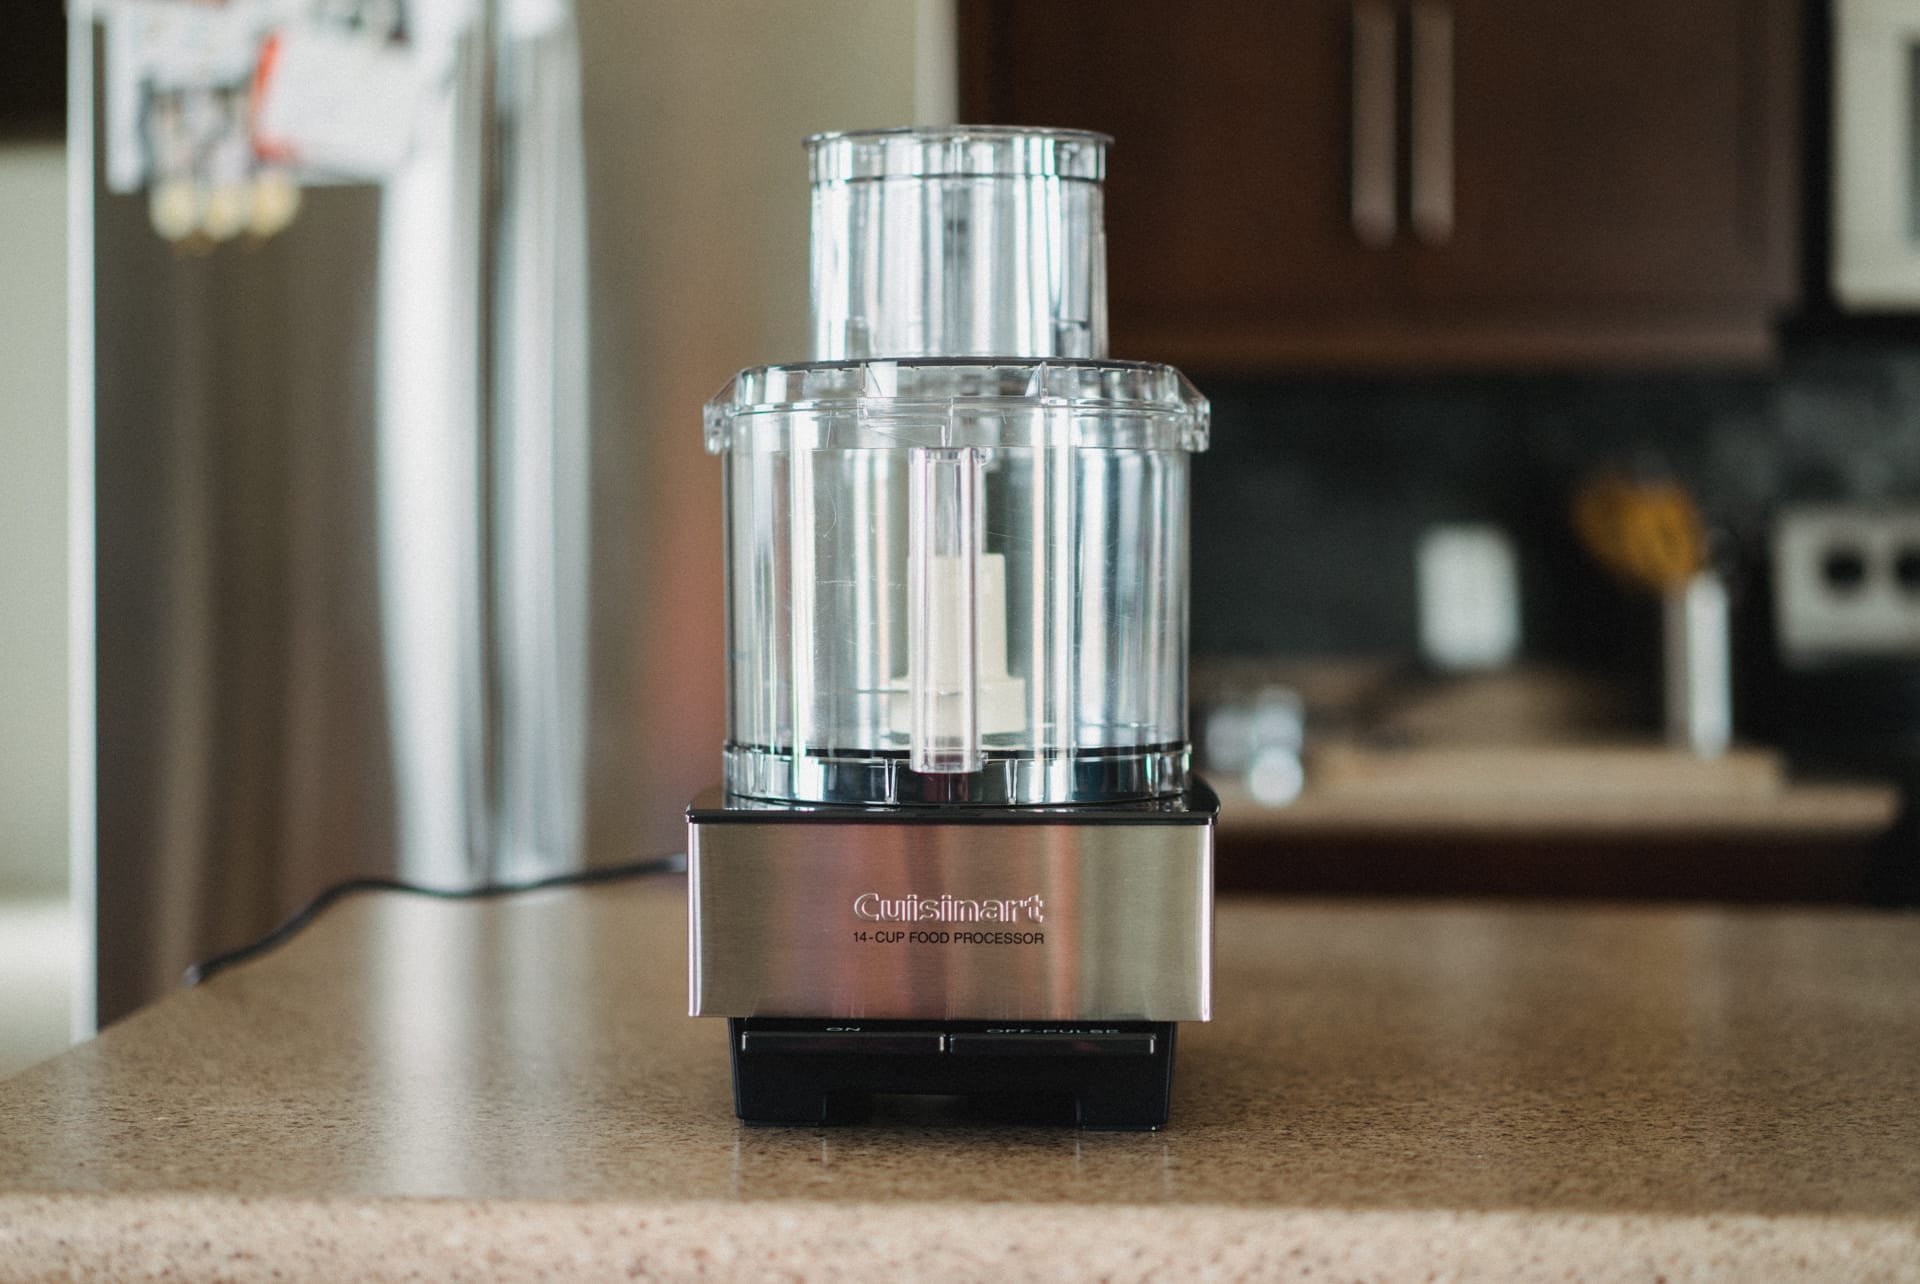 How To Turn On A Cuisinart Food Processor